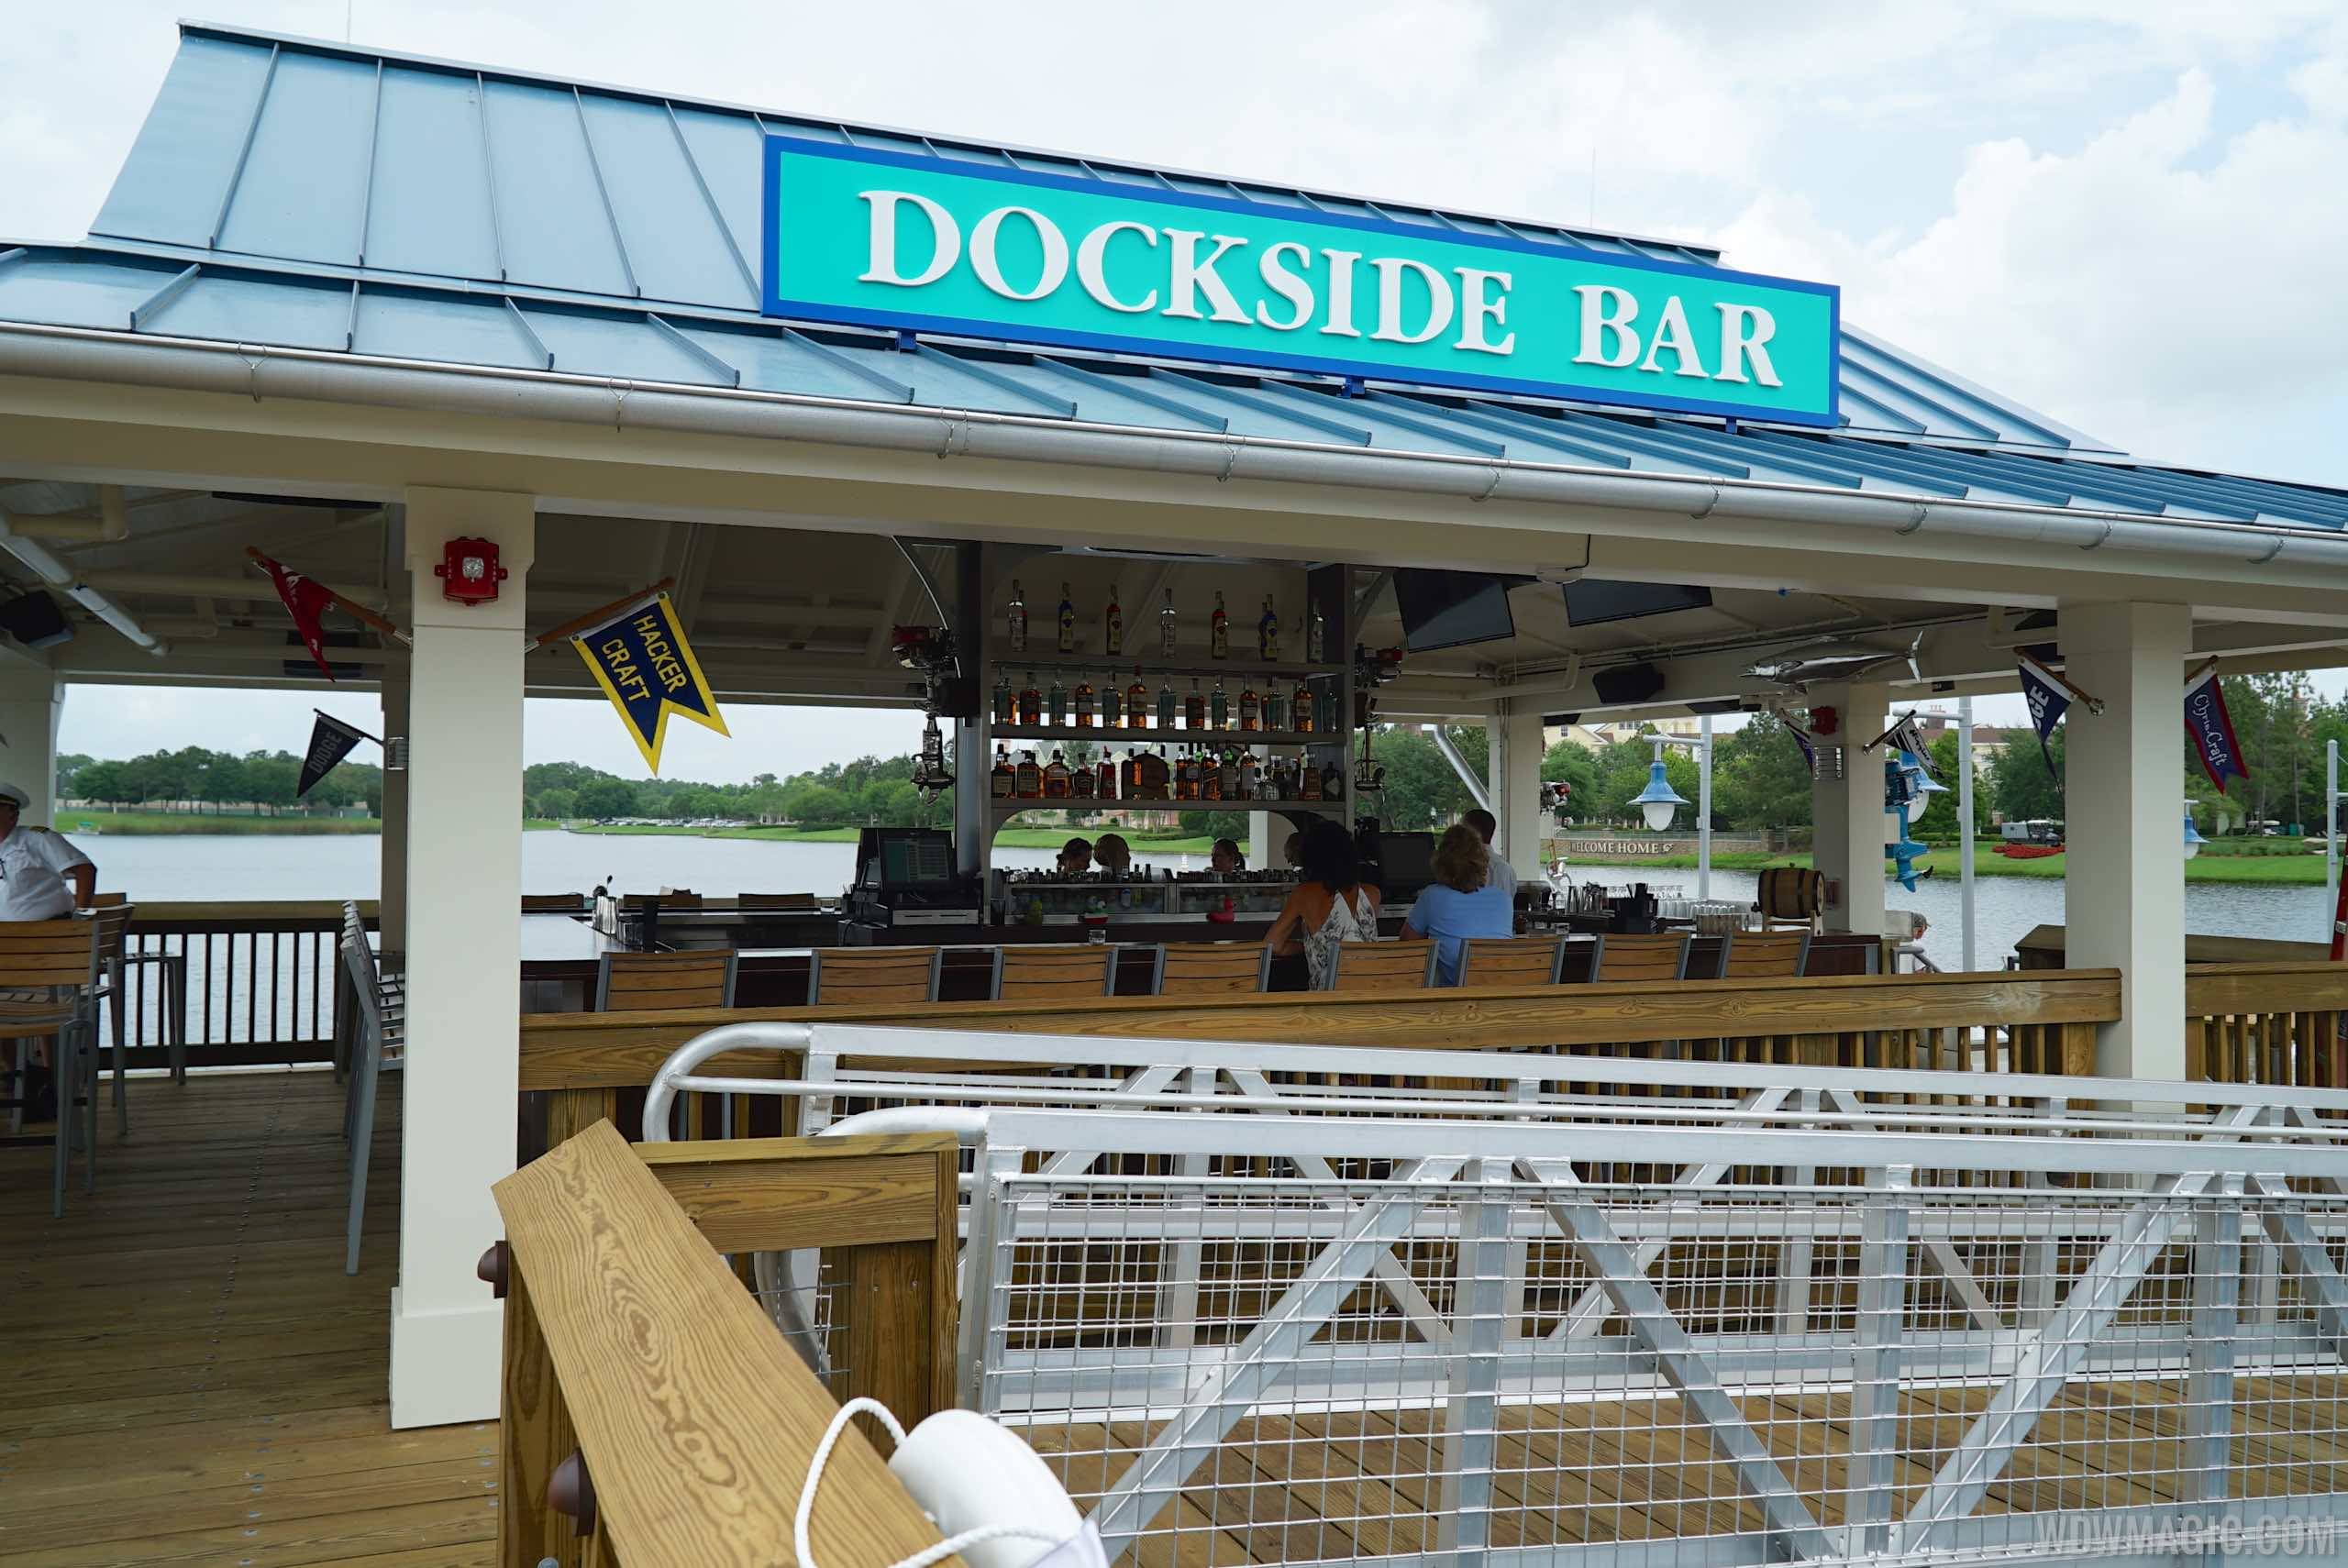 The BOATHOUSE - The Dockside Bar